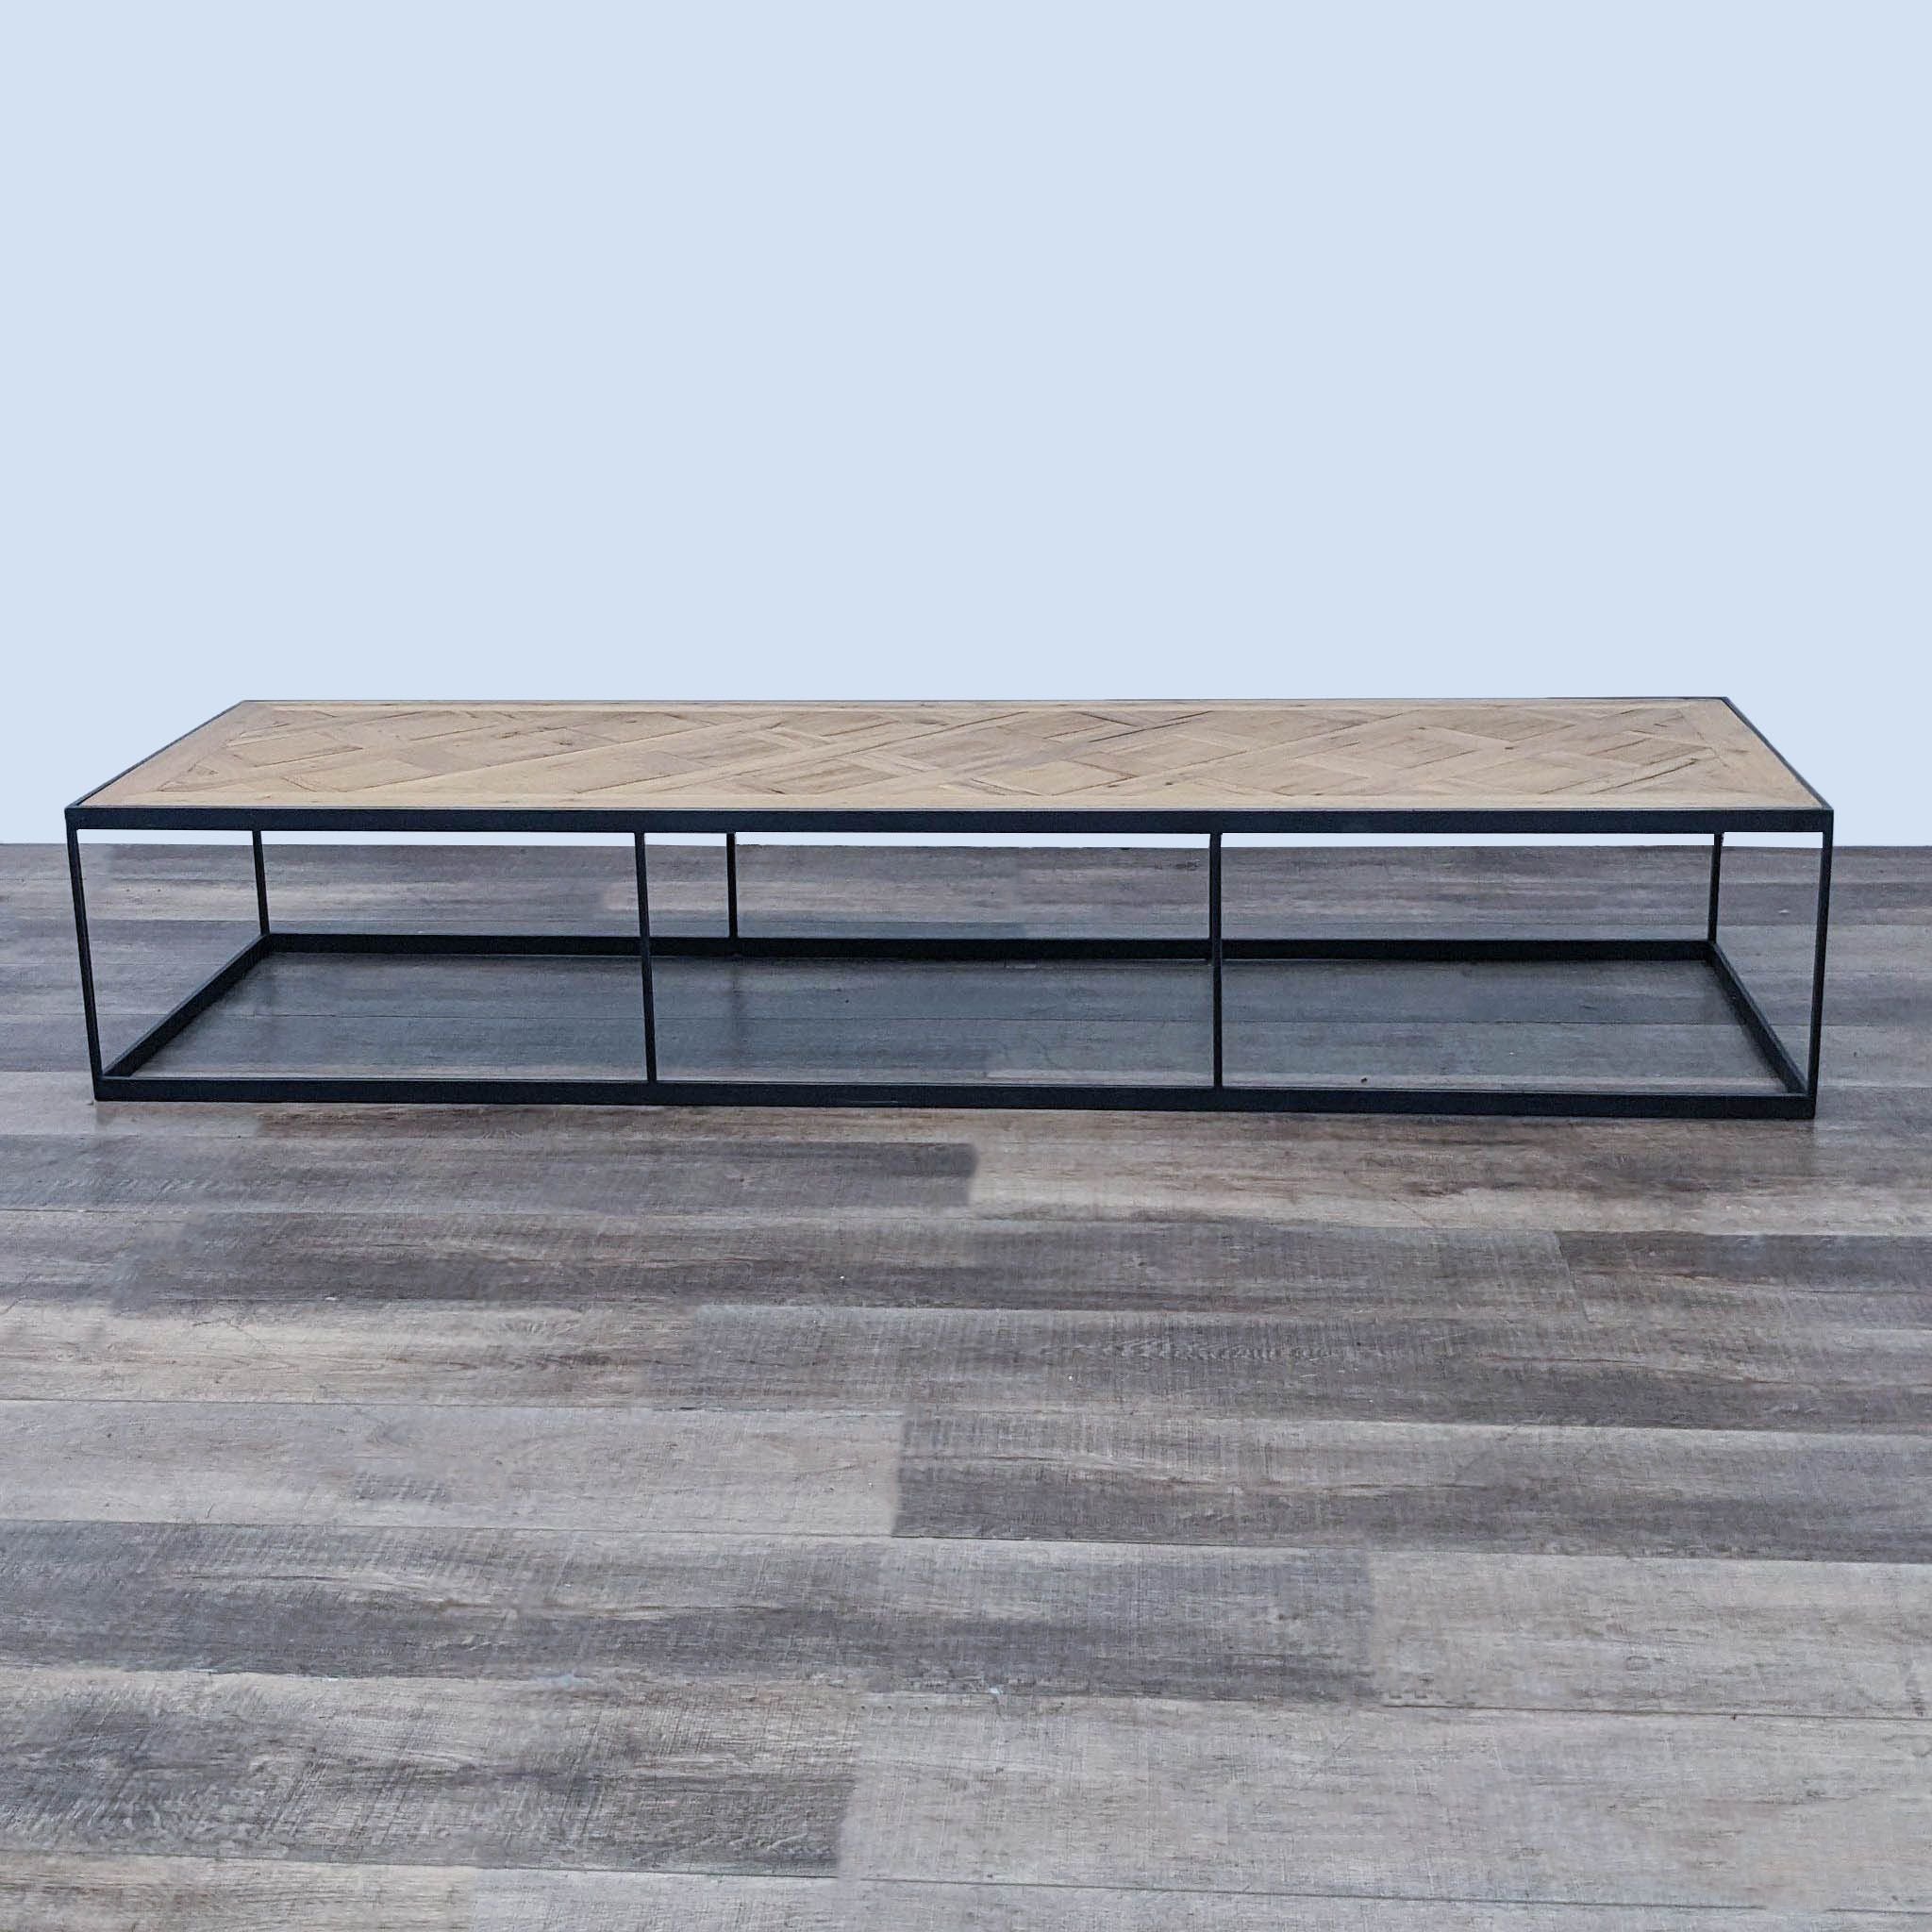 Reperch brand coffee table with a metal frame and patterned wooden top on a gray floor.